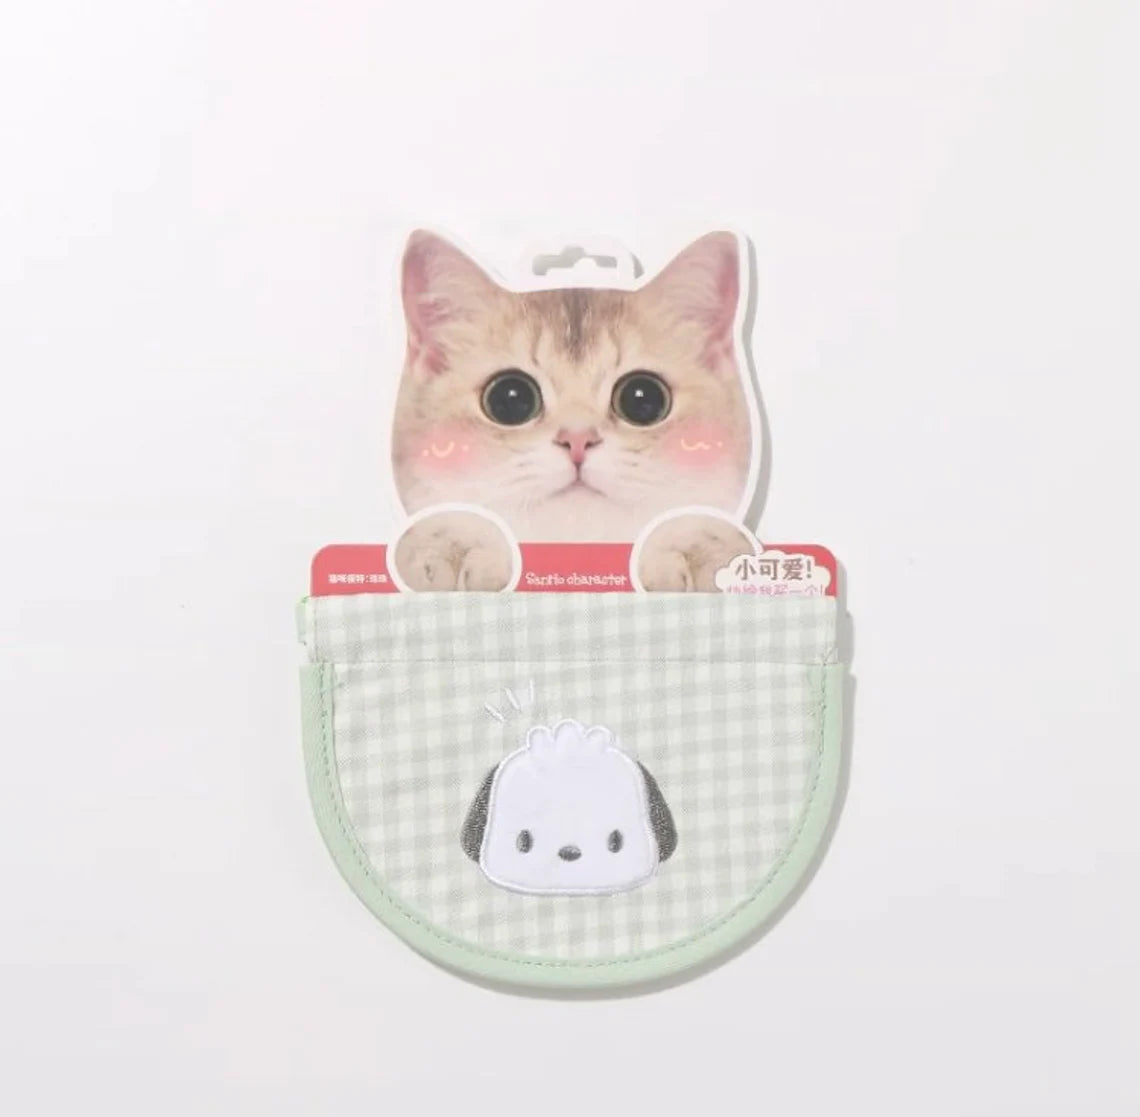 Pet Bib for Cat and Small Dog Hello Kitty My Melody Kuromi Cinnamoroll Pompompurin Pochacco Accessory Embroidery Collar